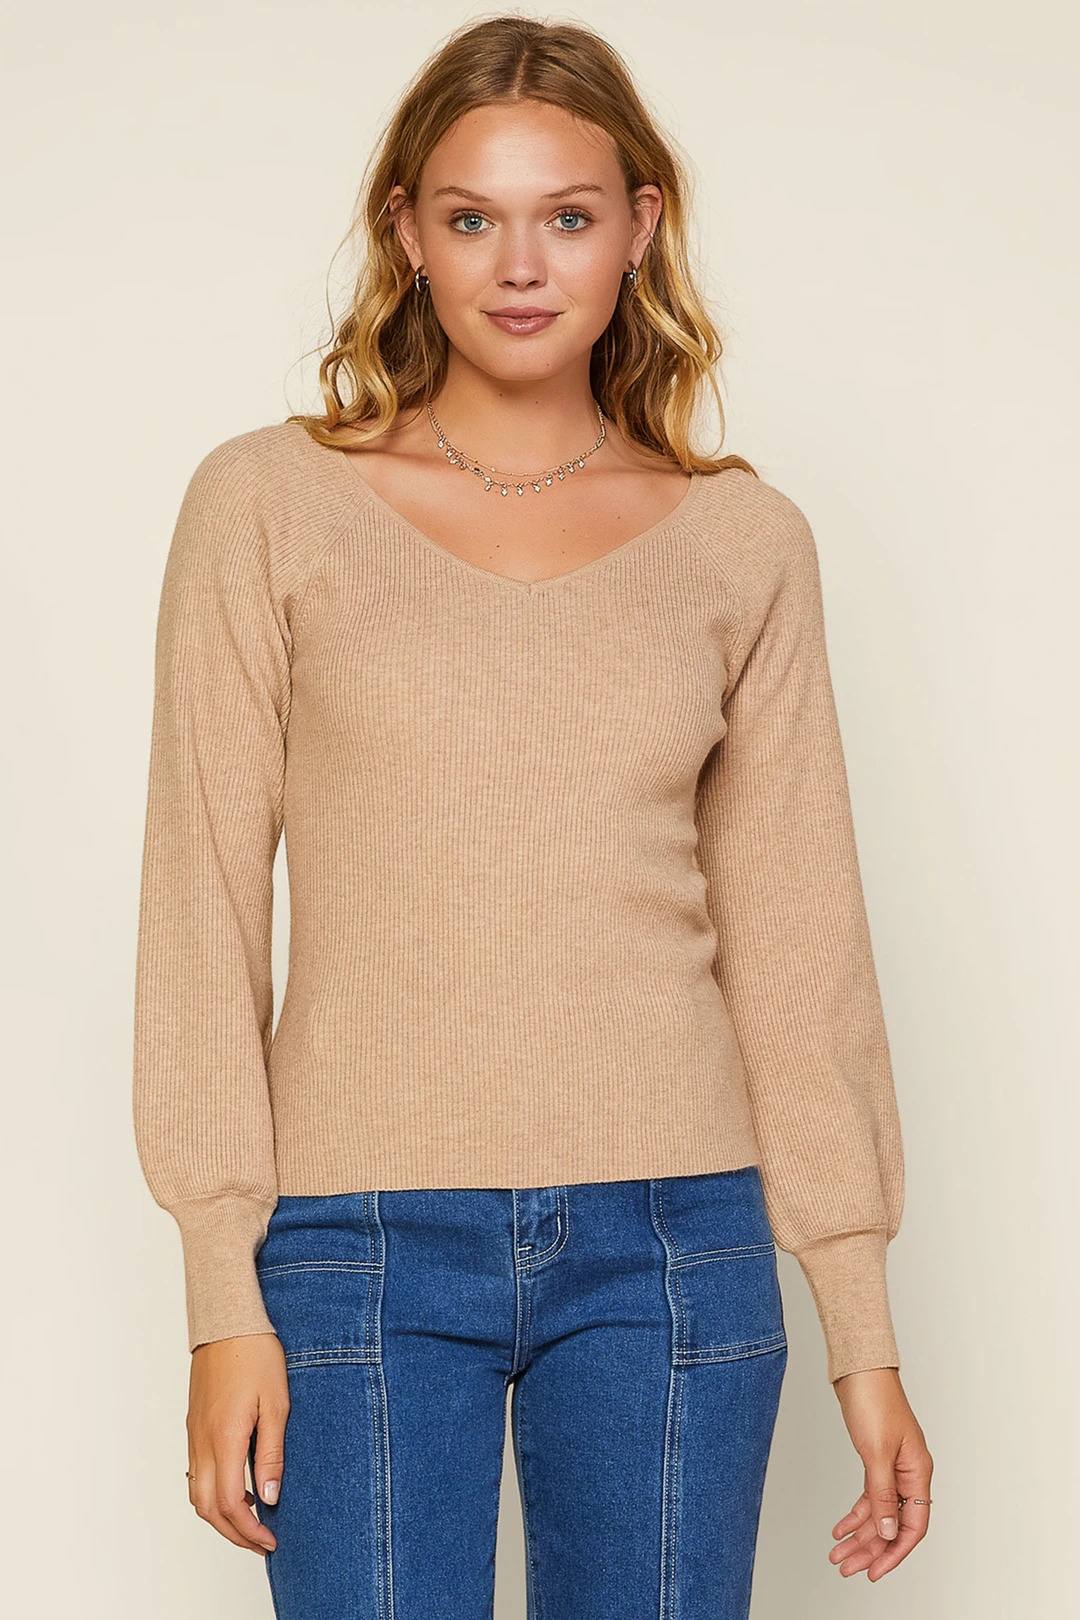 Shop Village Vogue for Raglan Sleeve Sweater from Skies Are Blue